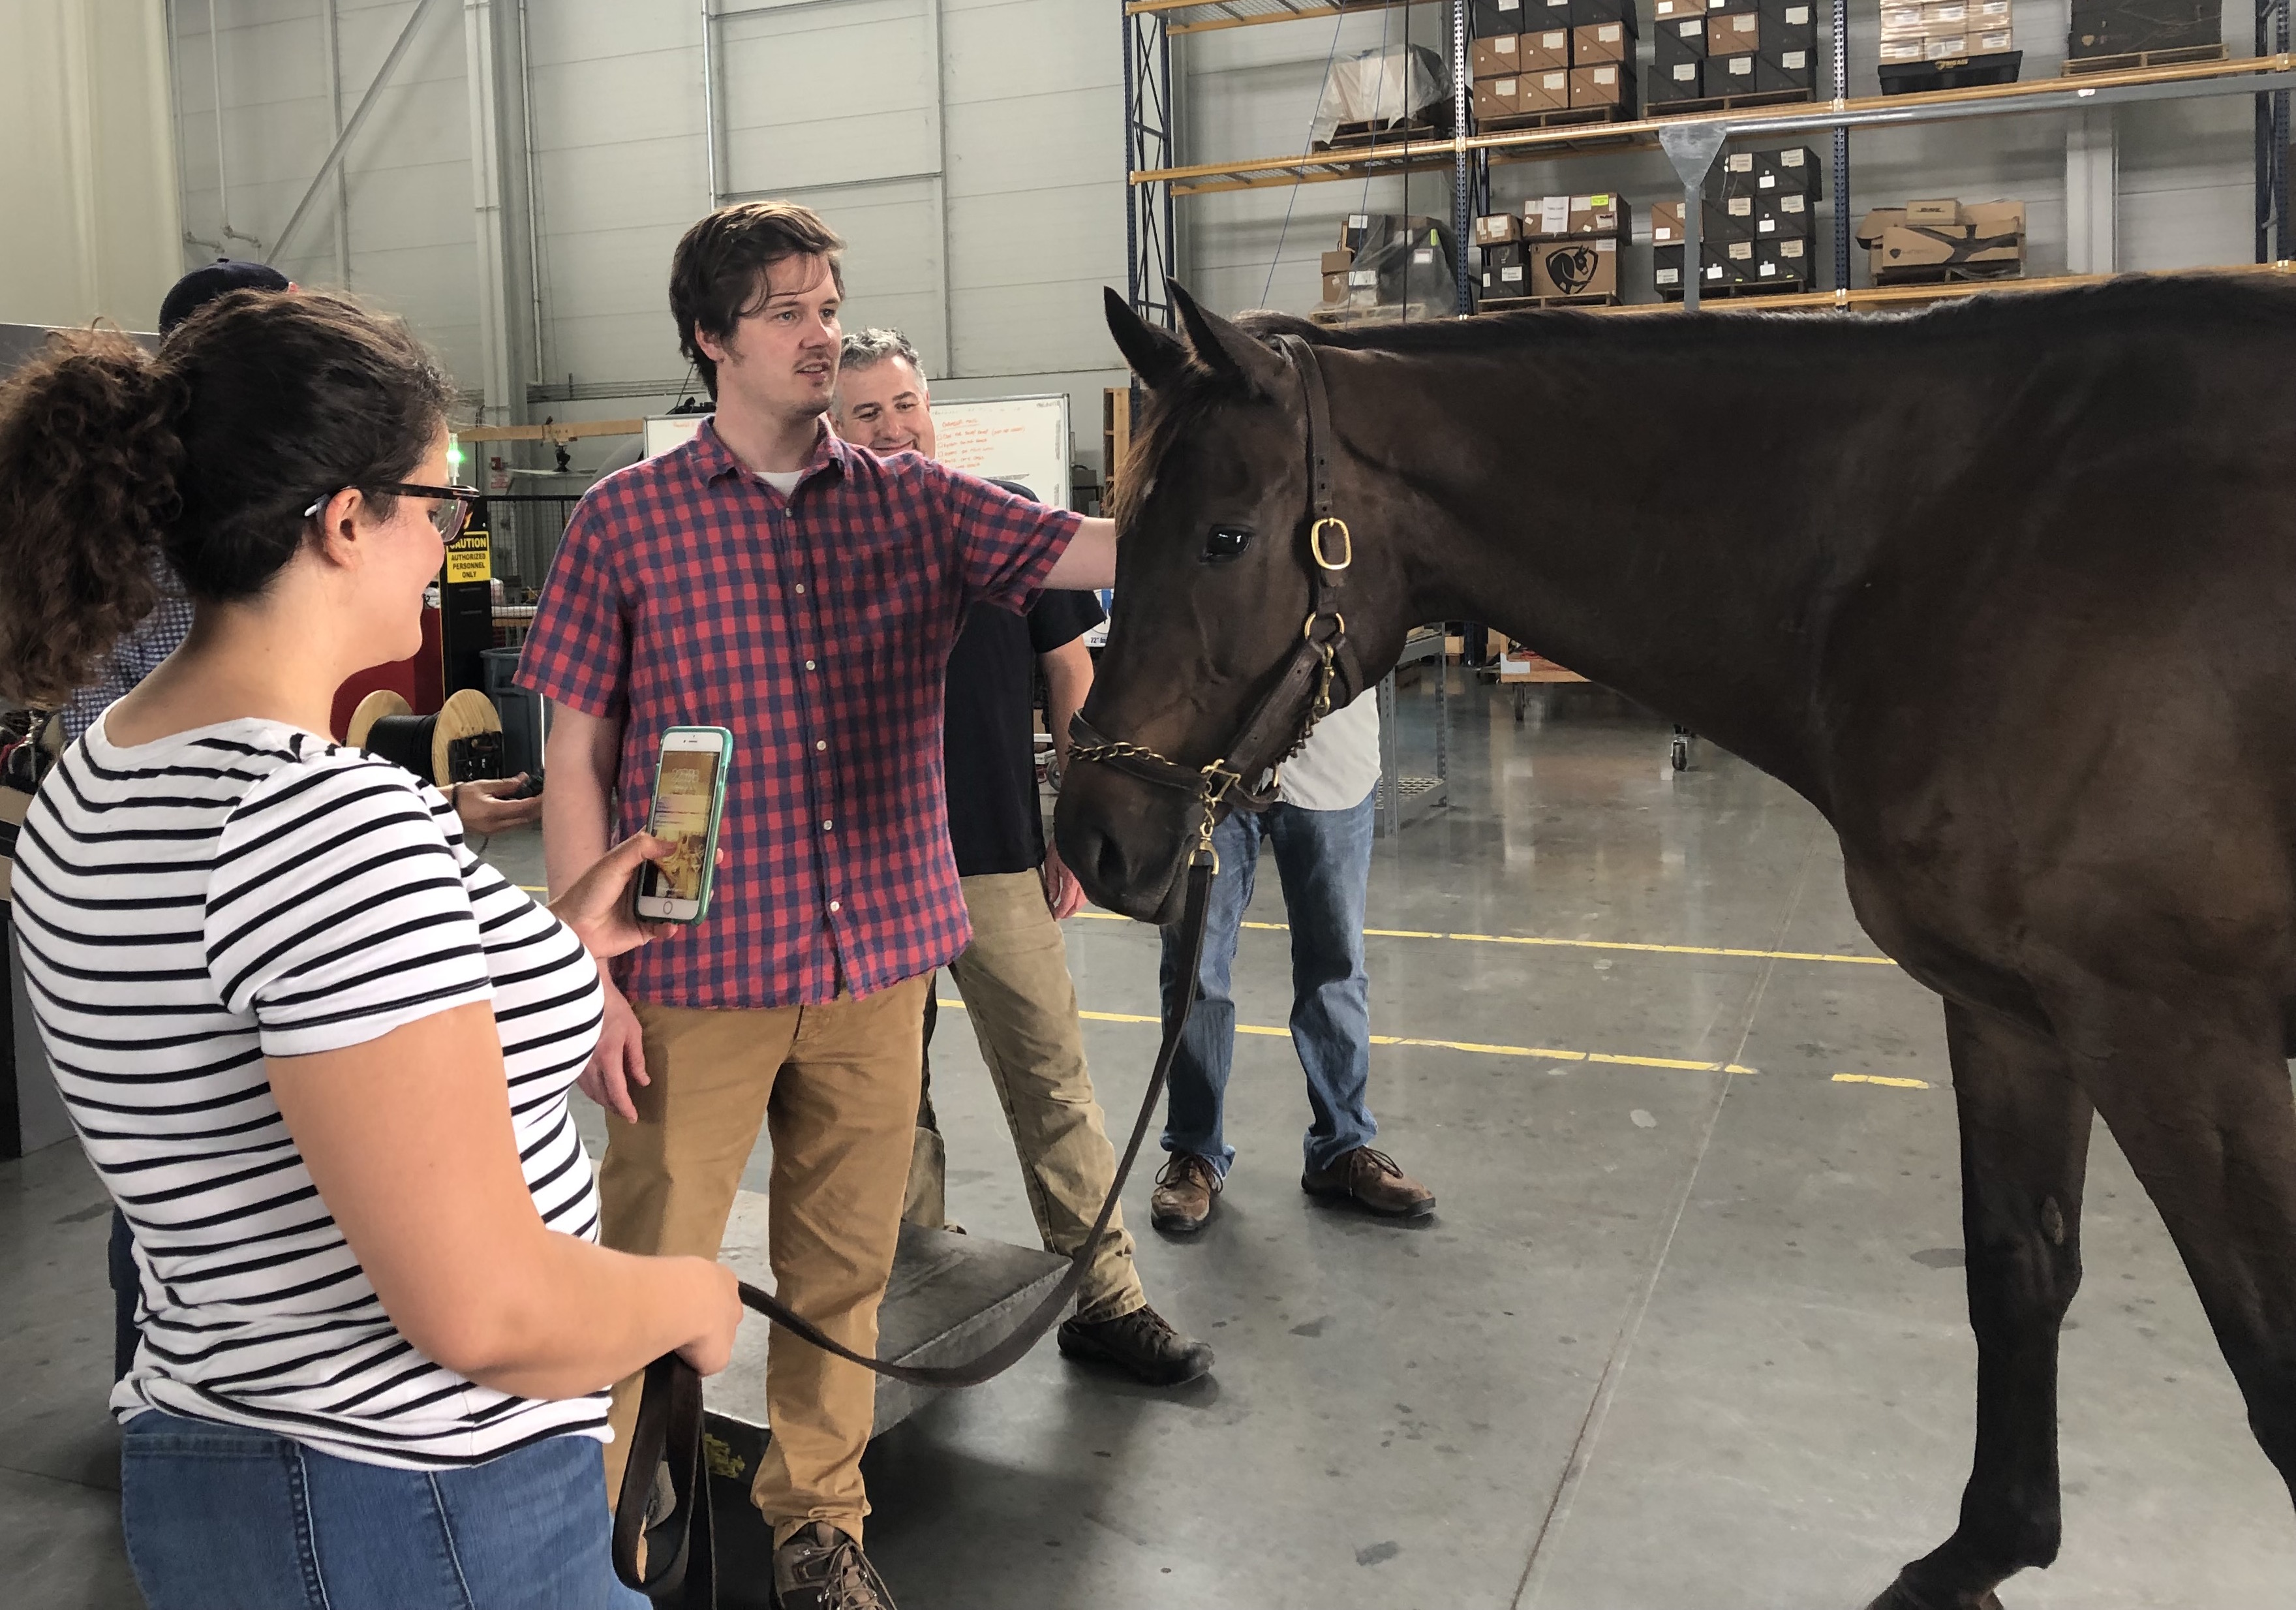 New friends: “A lot of the production crew had never been around horses,” says Carleigh Fedorka. “At first, they were petrified of Nixon, but by the end they got a group picture with him and were excited.” Photo: Carleigh Fedorka